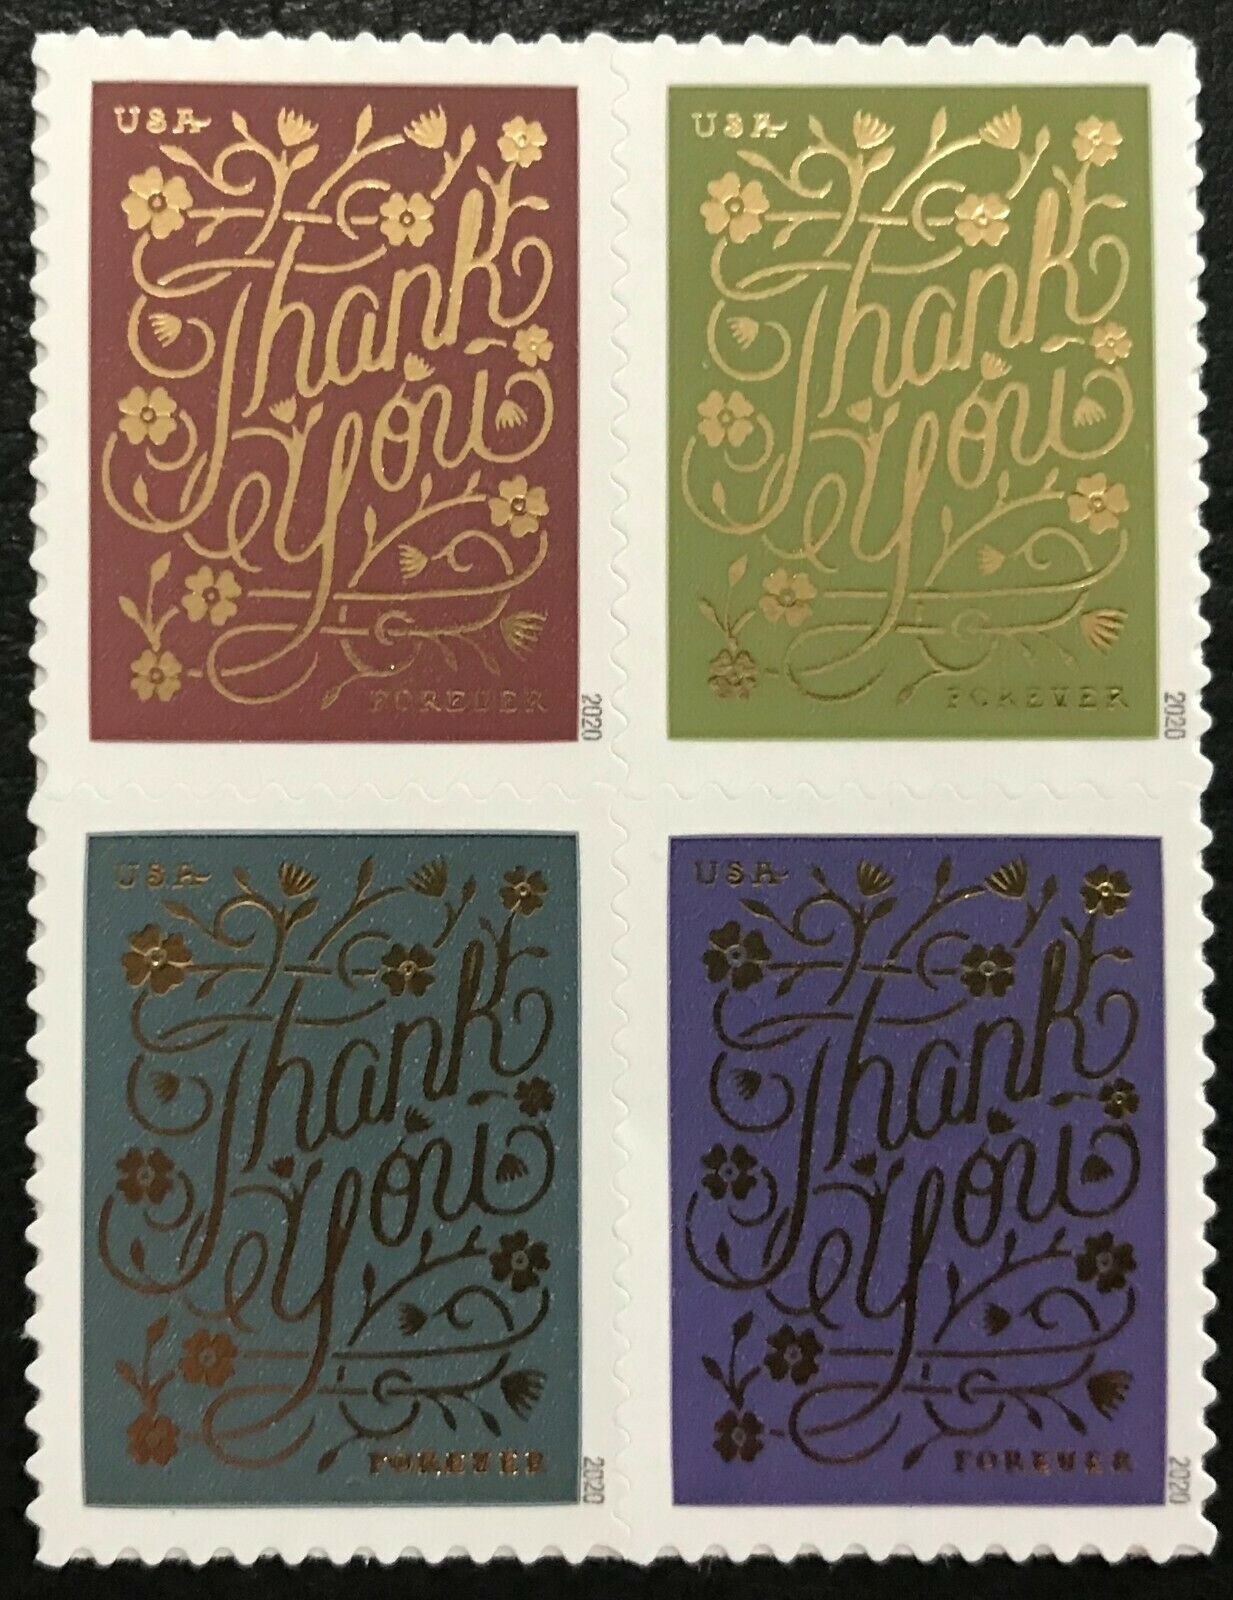 5519-5522  Forever Thank You Mint Block of 4 #5519-5522blk